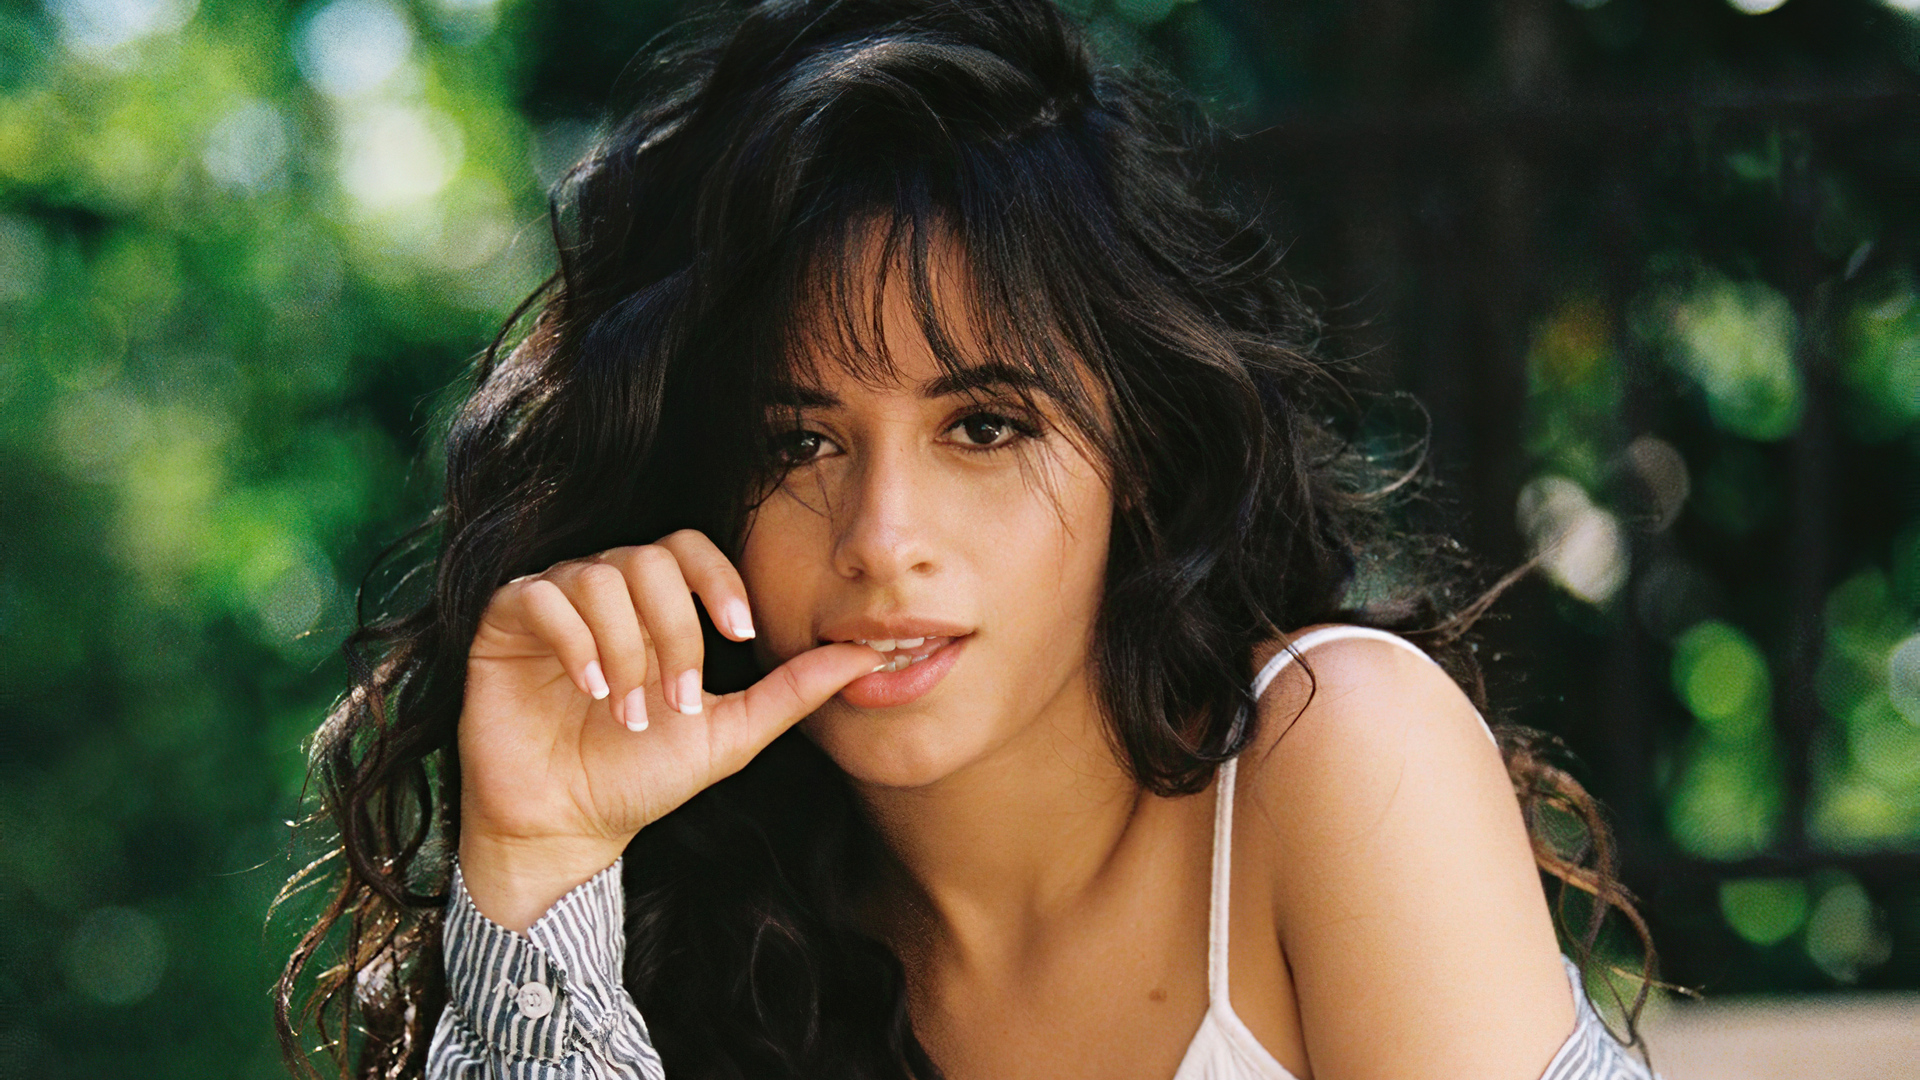 1920x1080 Camila Cabello 4k 2020 Laptop Full Hd 1080p Hd 4k Wallpapers Images Backgrounds